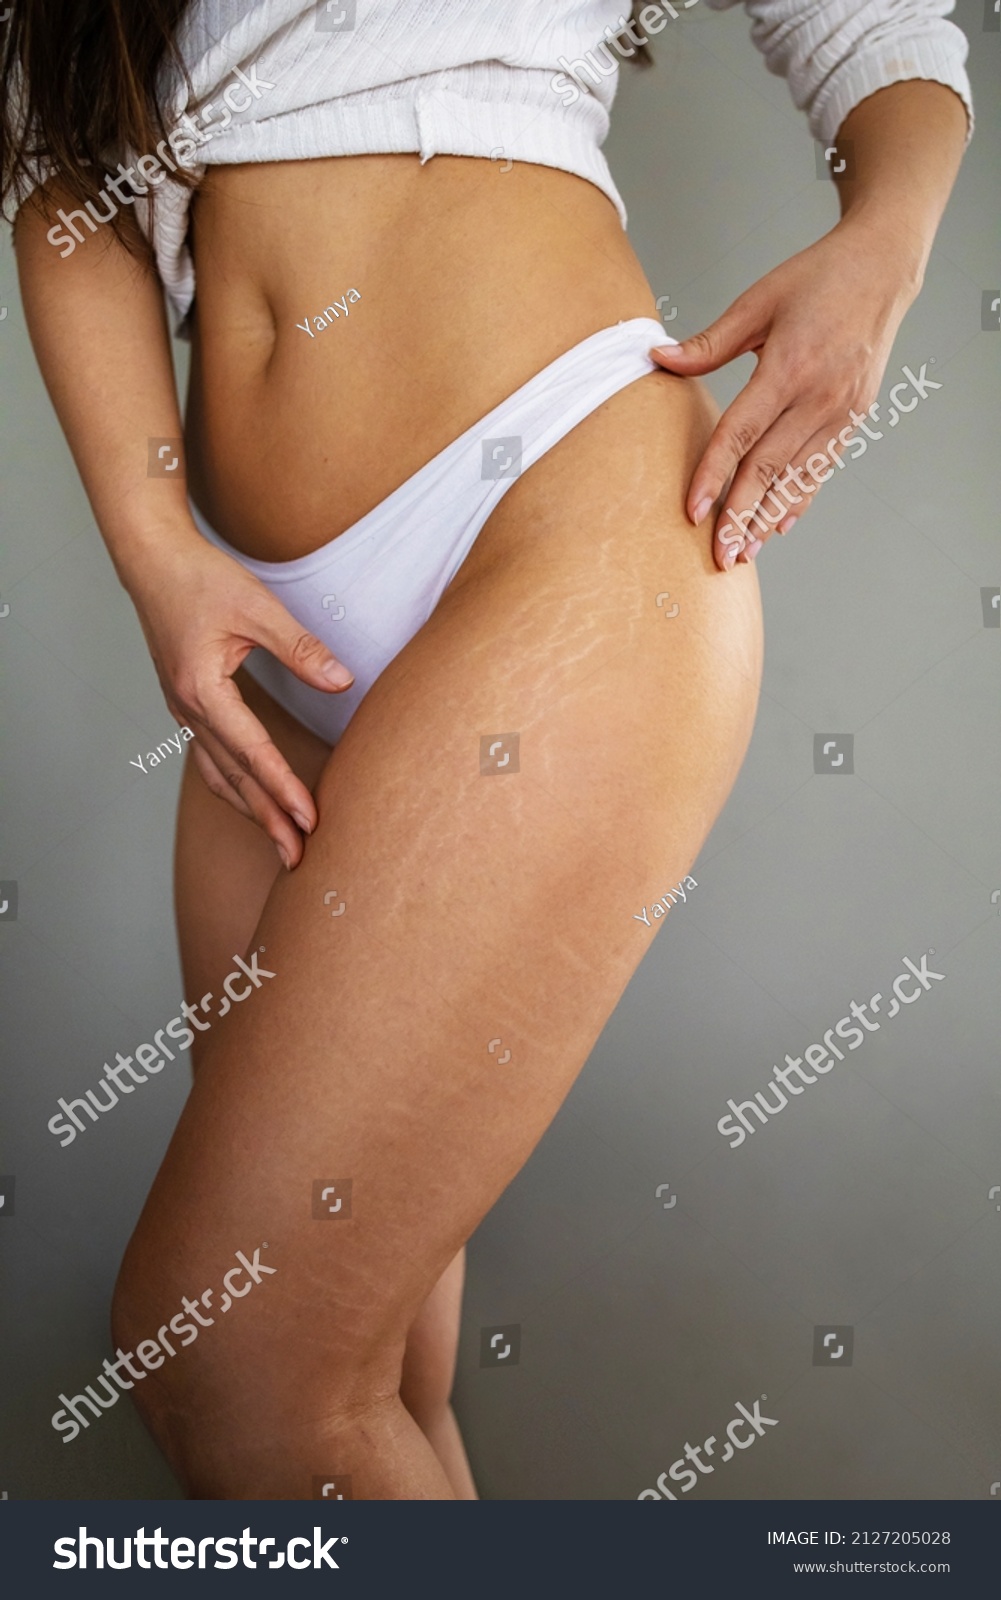 Stretch marks on female legs. A woman's hand holds a fat cellulite and a stretch mark on her leg. Cellulite. #2127205028